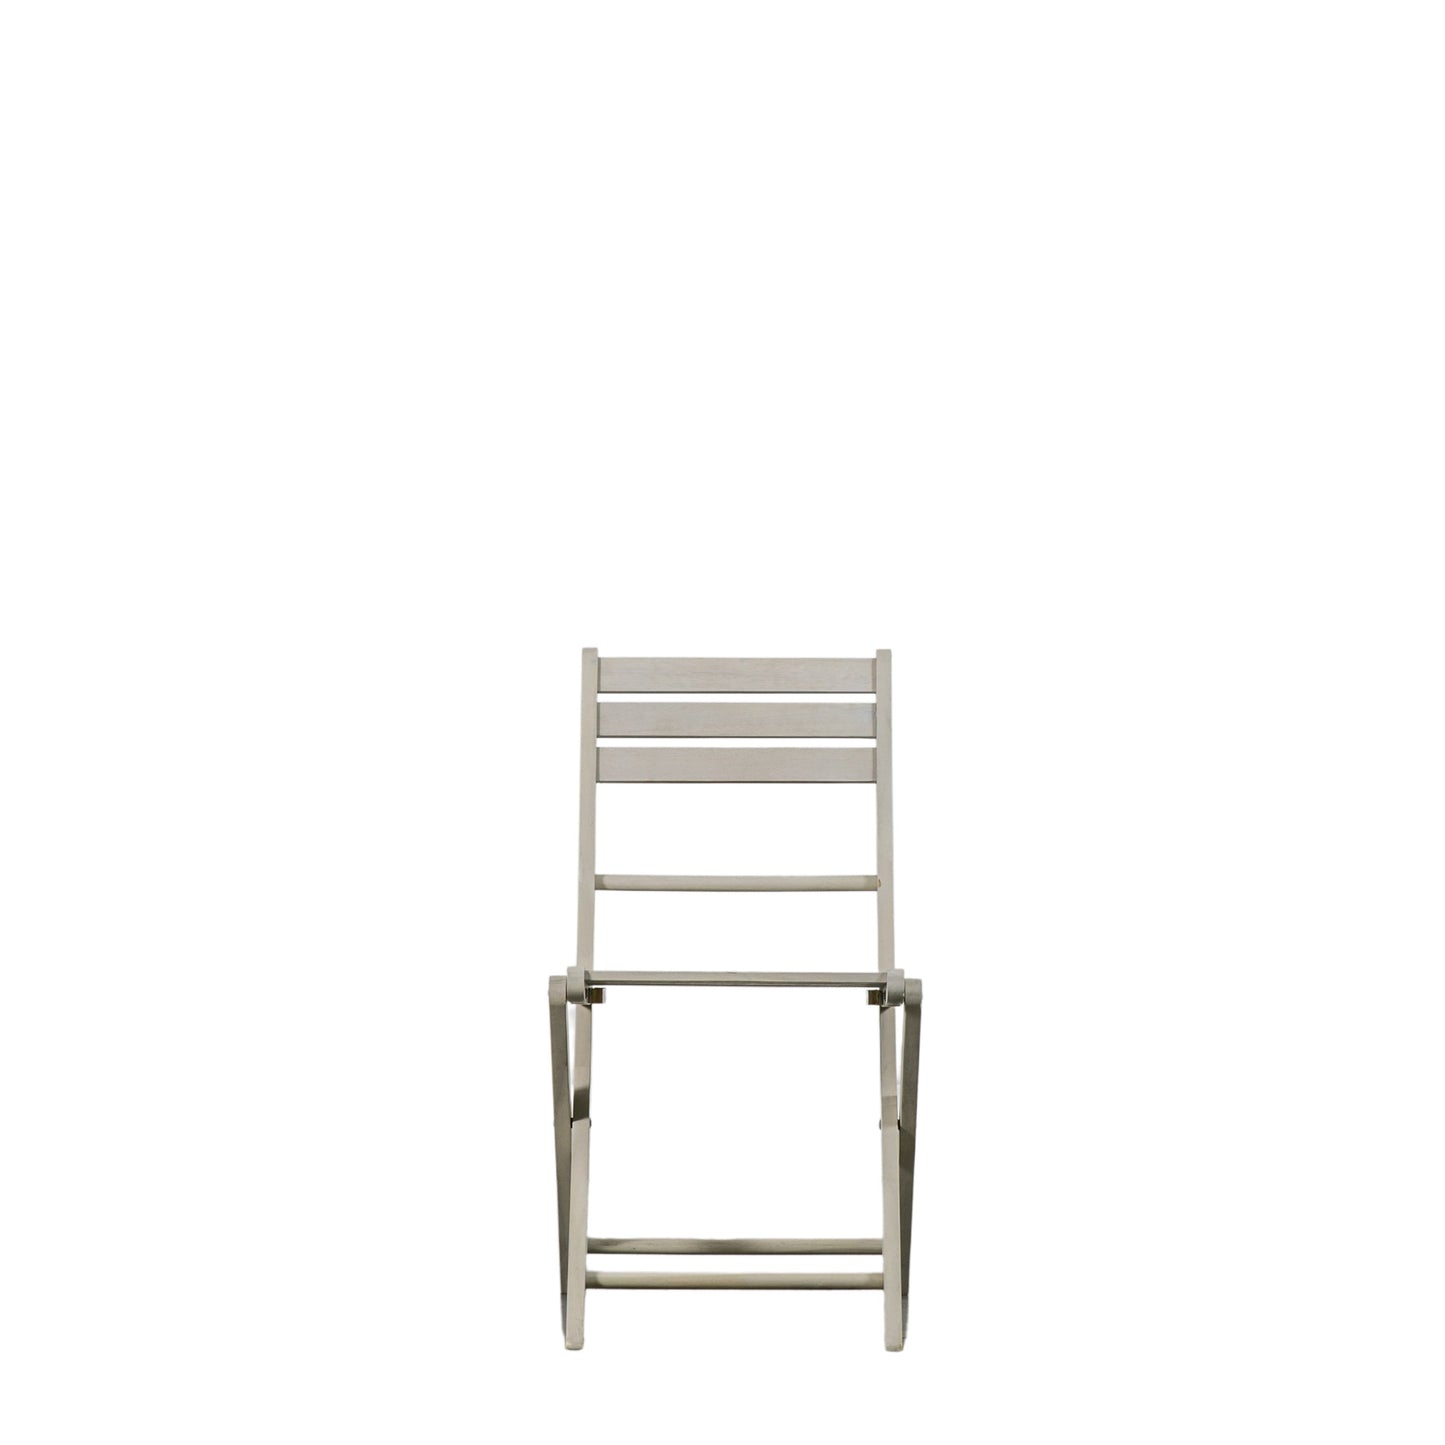 Load image into Gallery viewer, A Chillington Folding Chair Whitewash (2pk) for interior decor.
